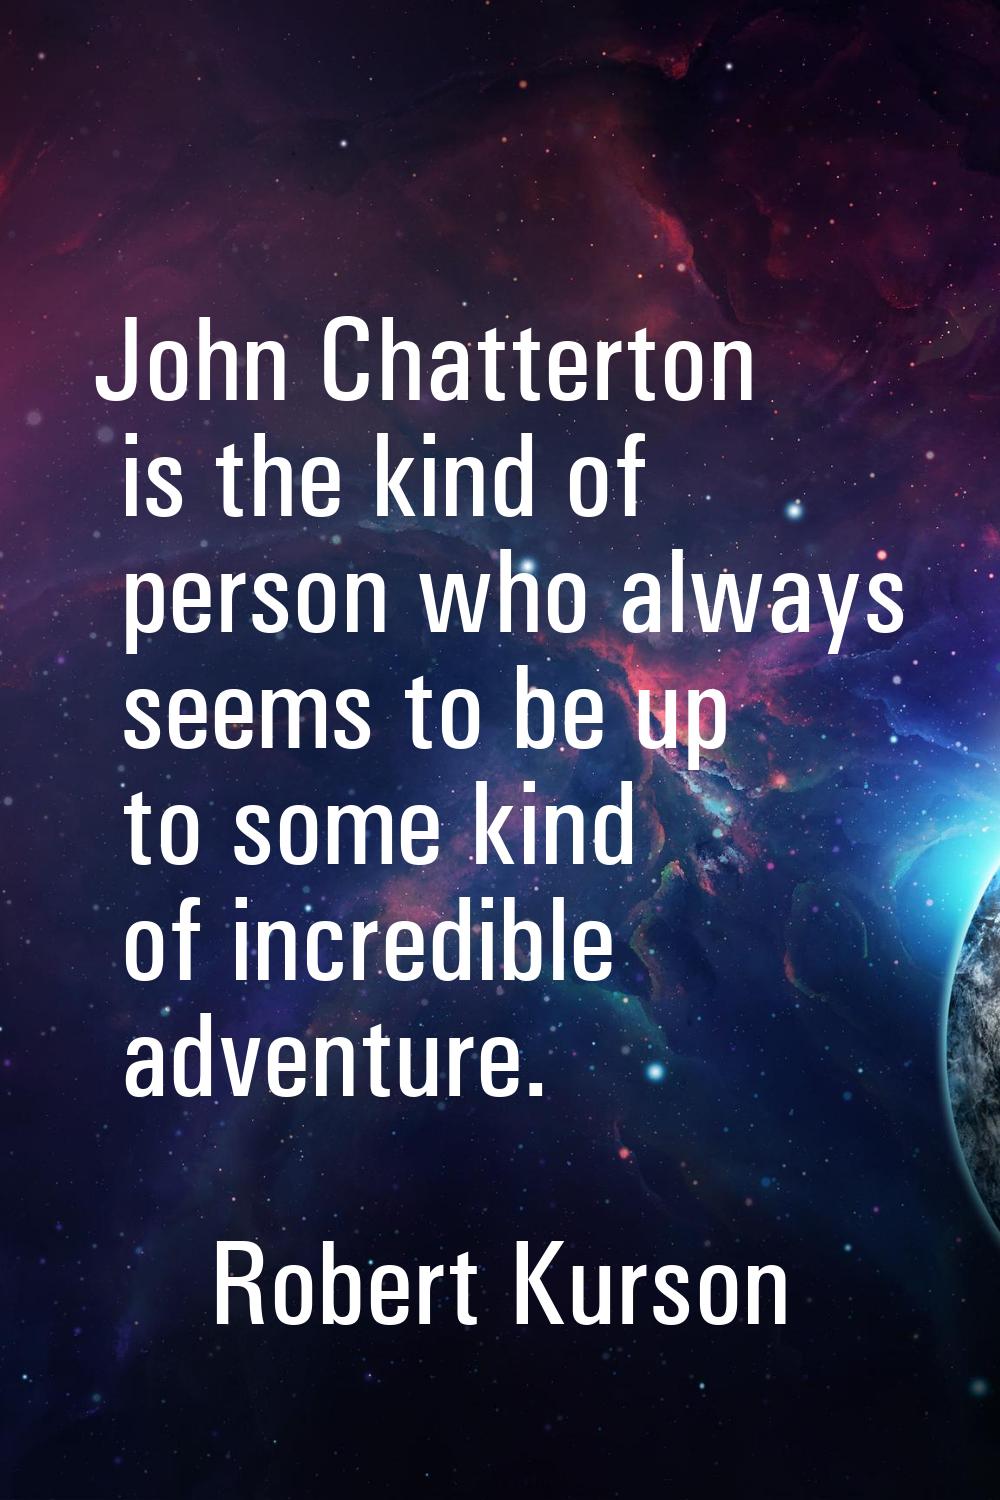 John Chatterton is the kind of person who always seems to be up to some kind of incredible adventur